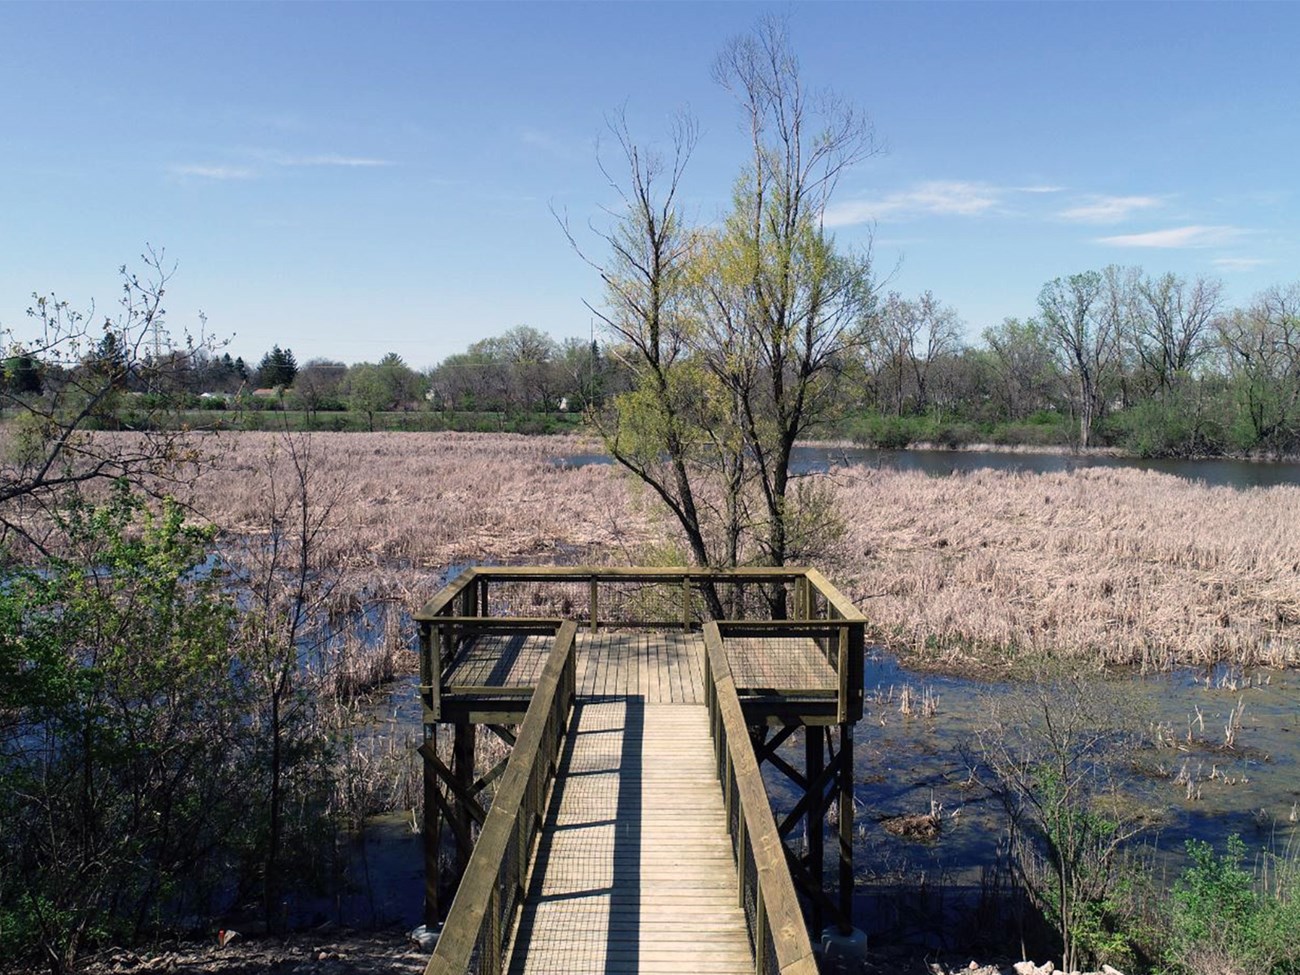 A wooden boardwalk that connects to a viewing platform overlooking a marsh